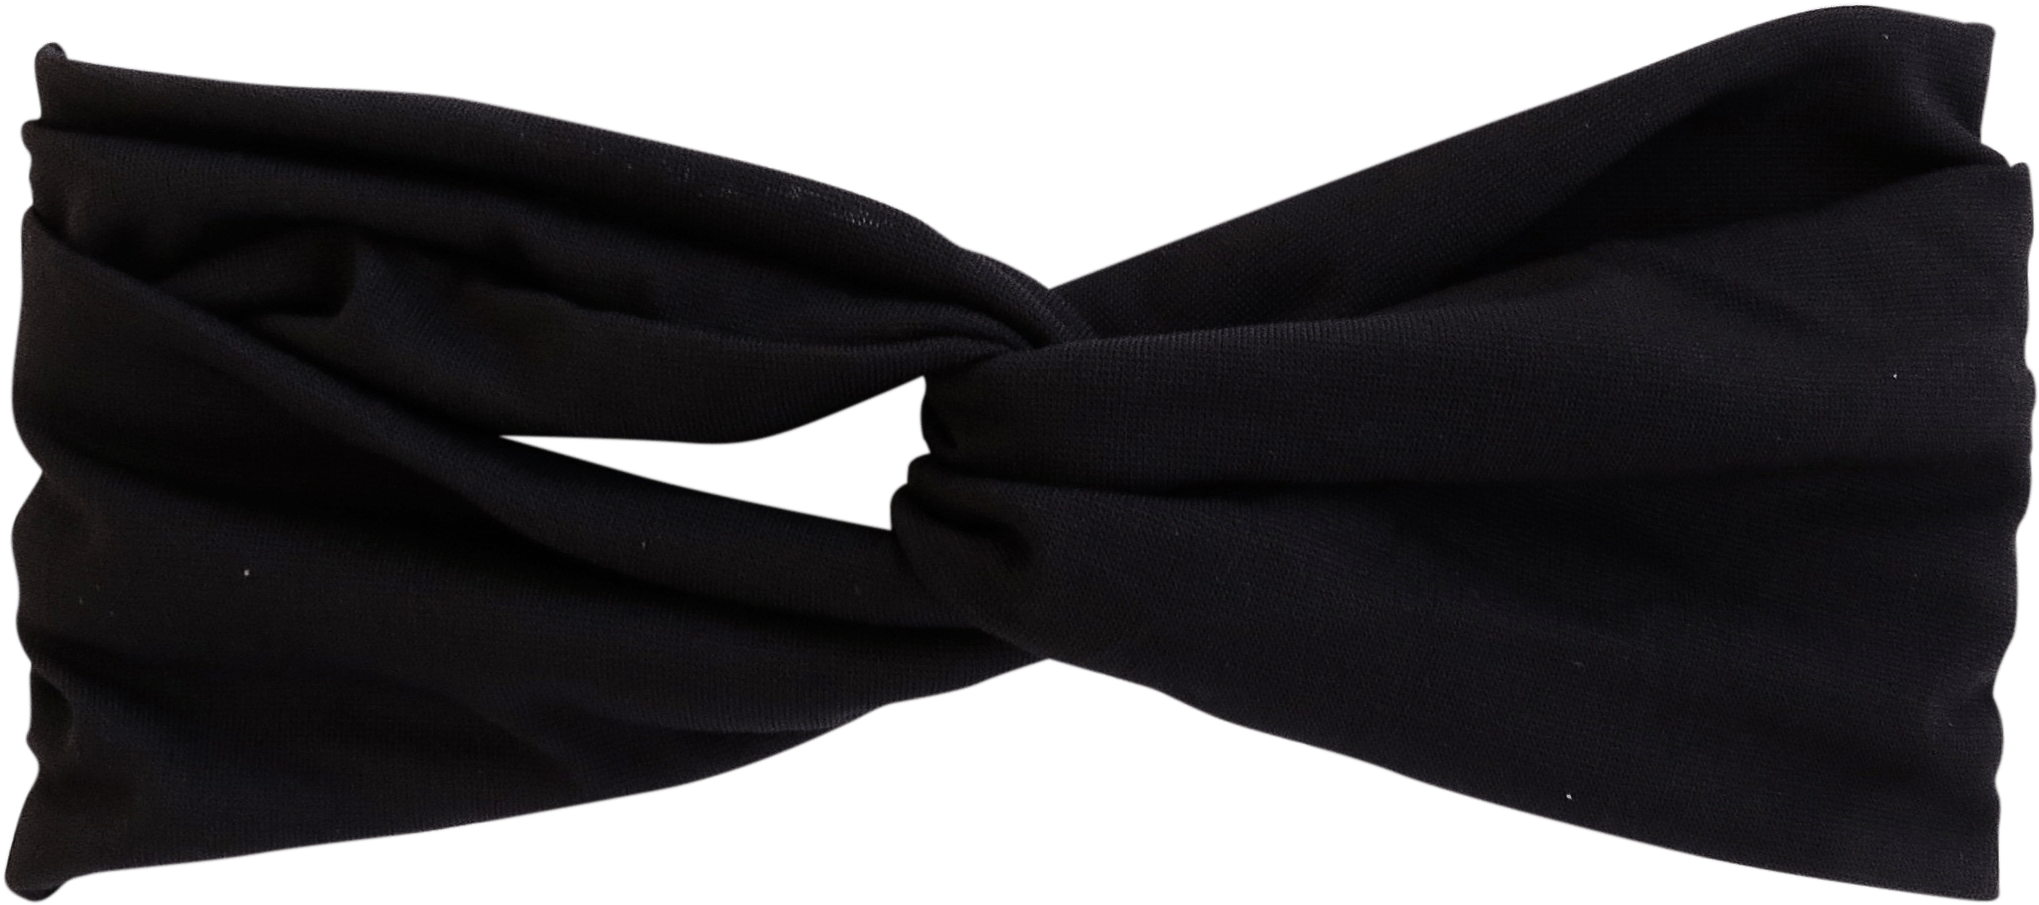 A Black Fabric Knot On A Black Background